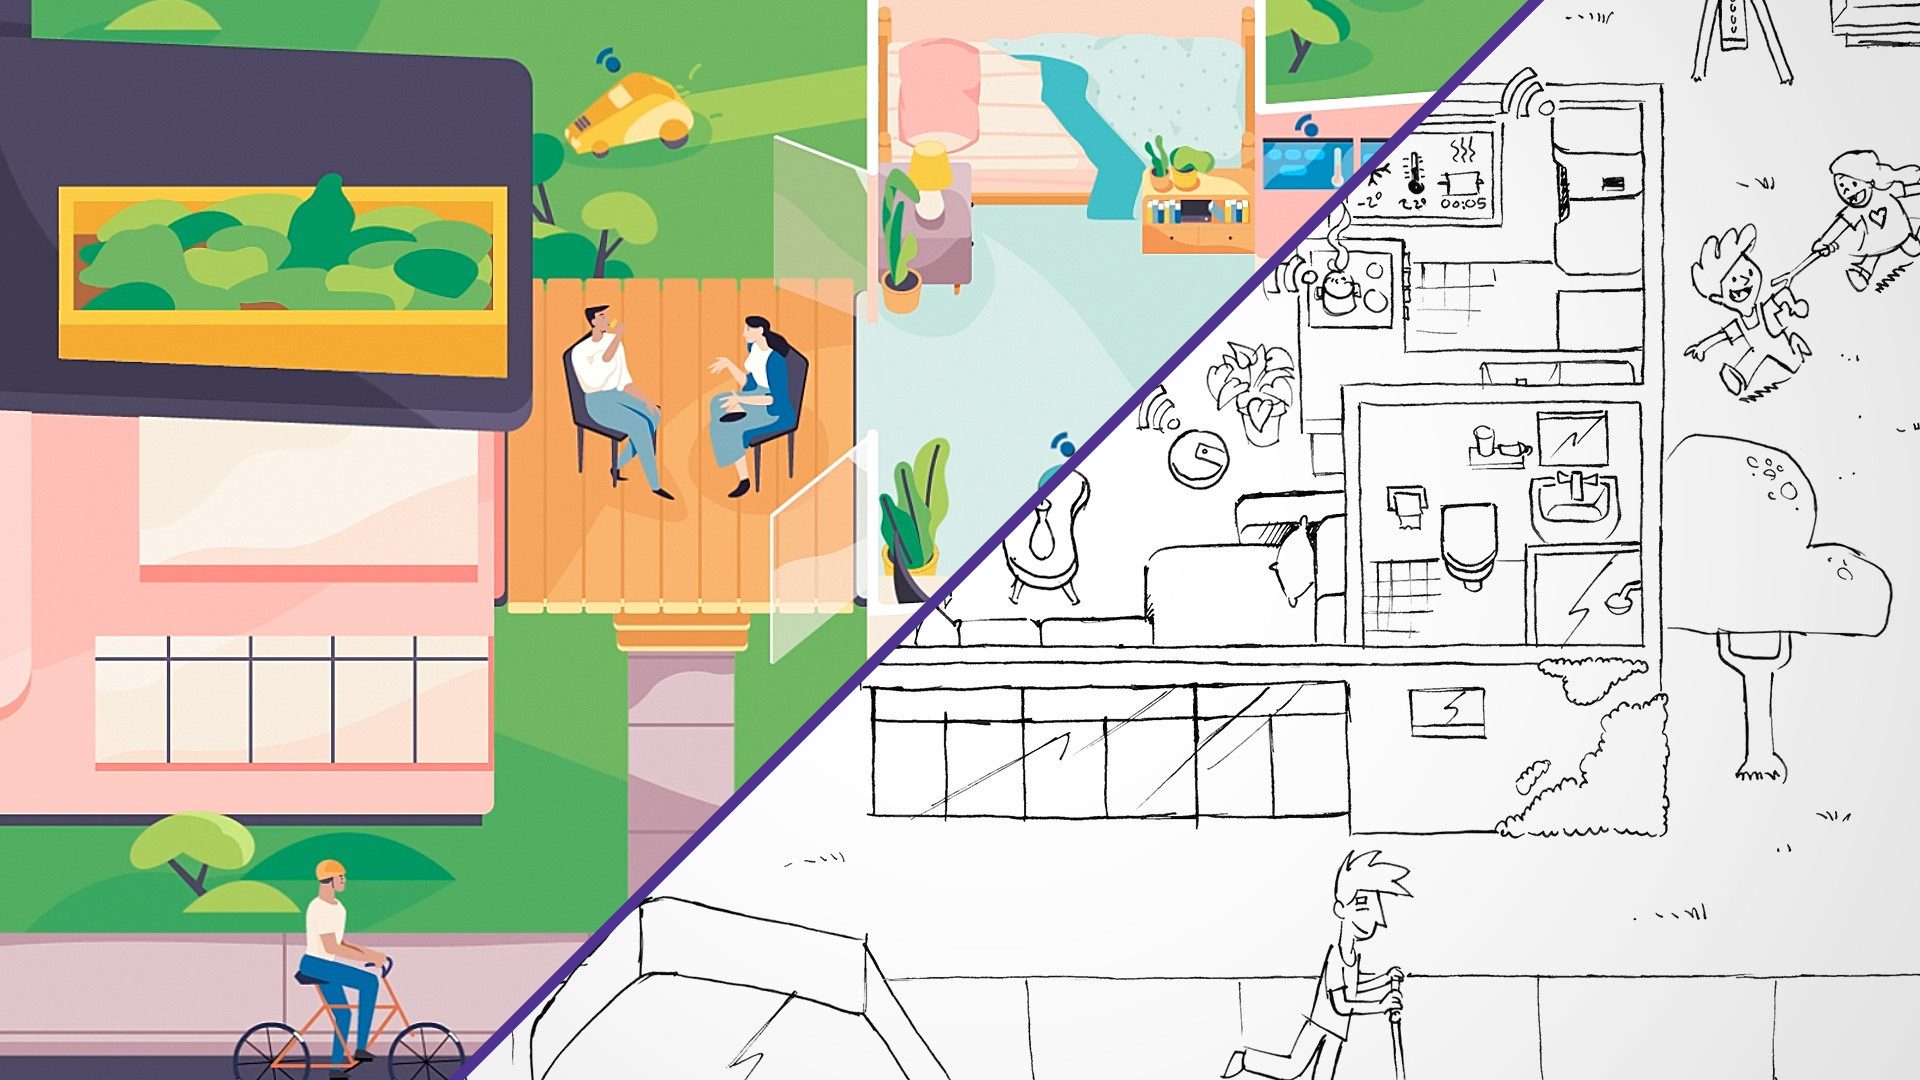 Picturesque… Bringing scribbles to life with illustration and animation